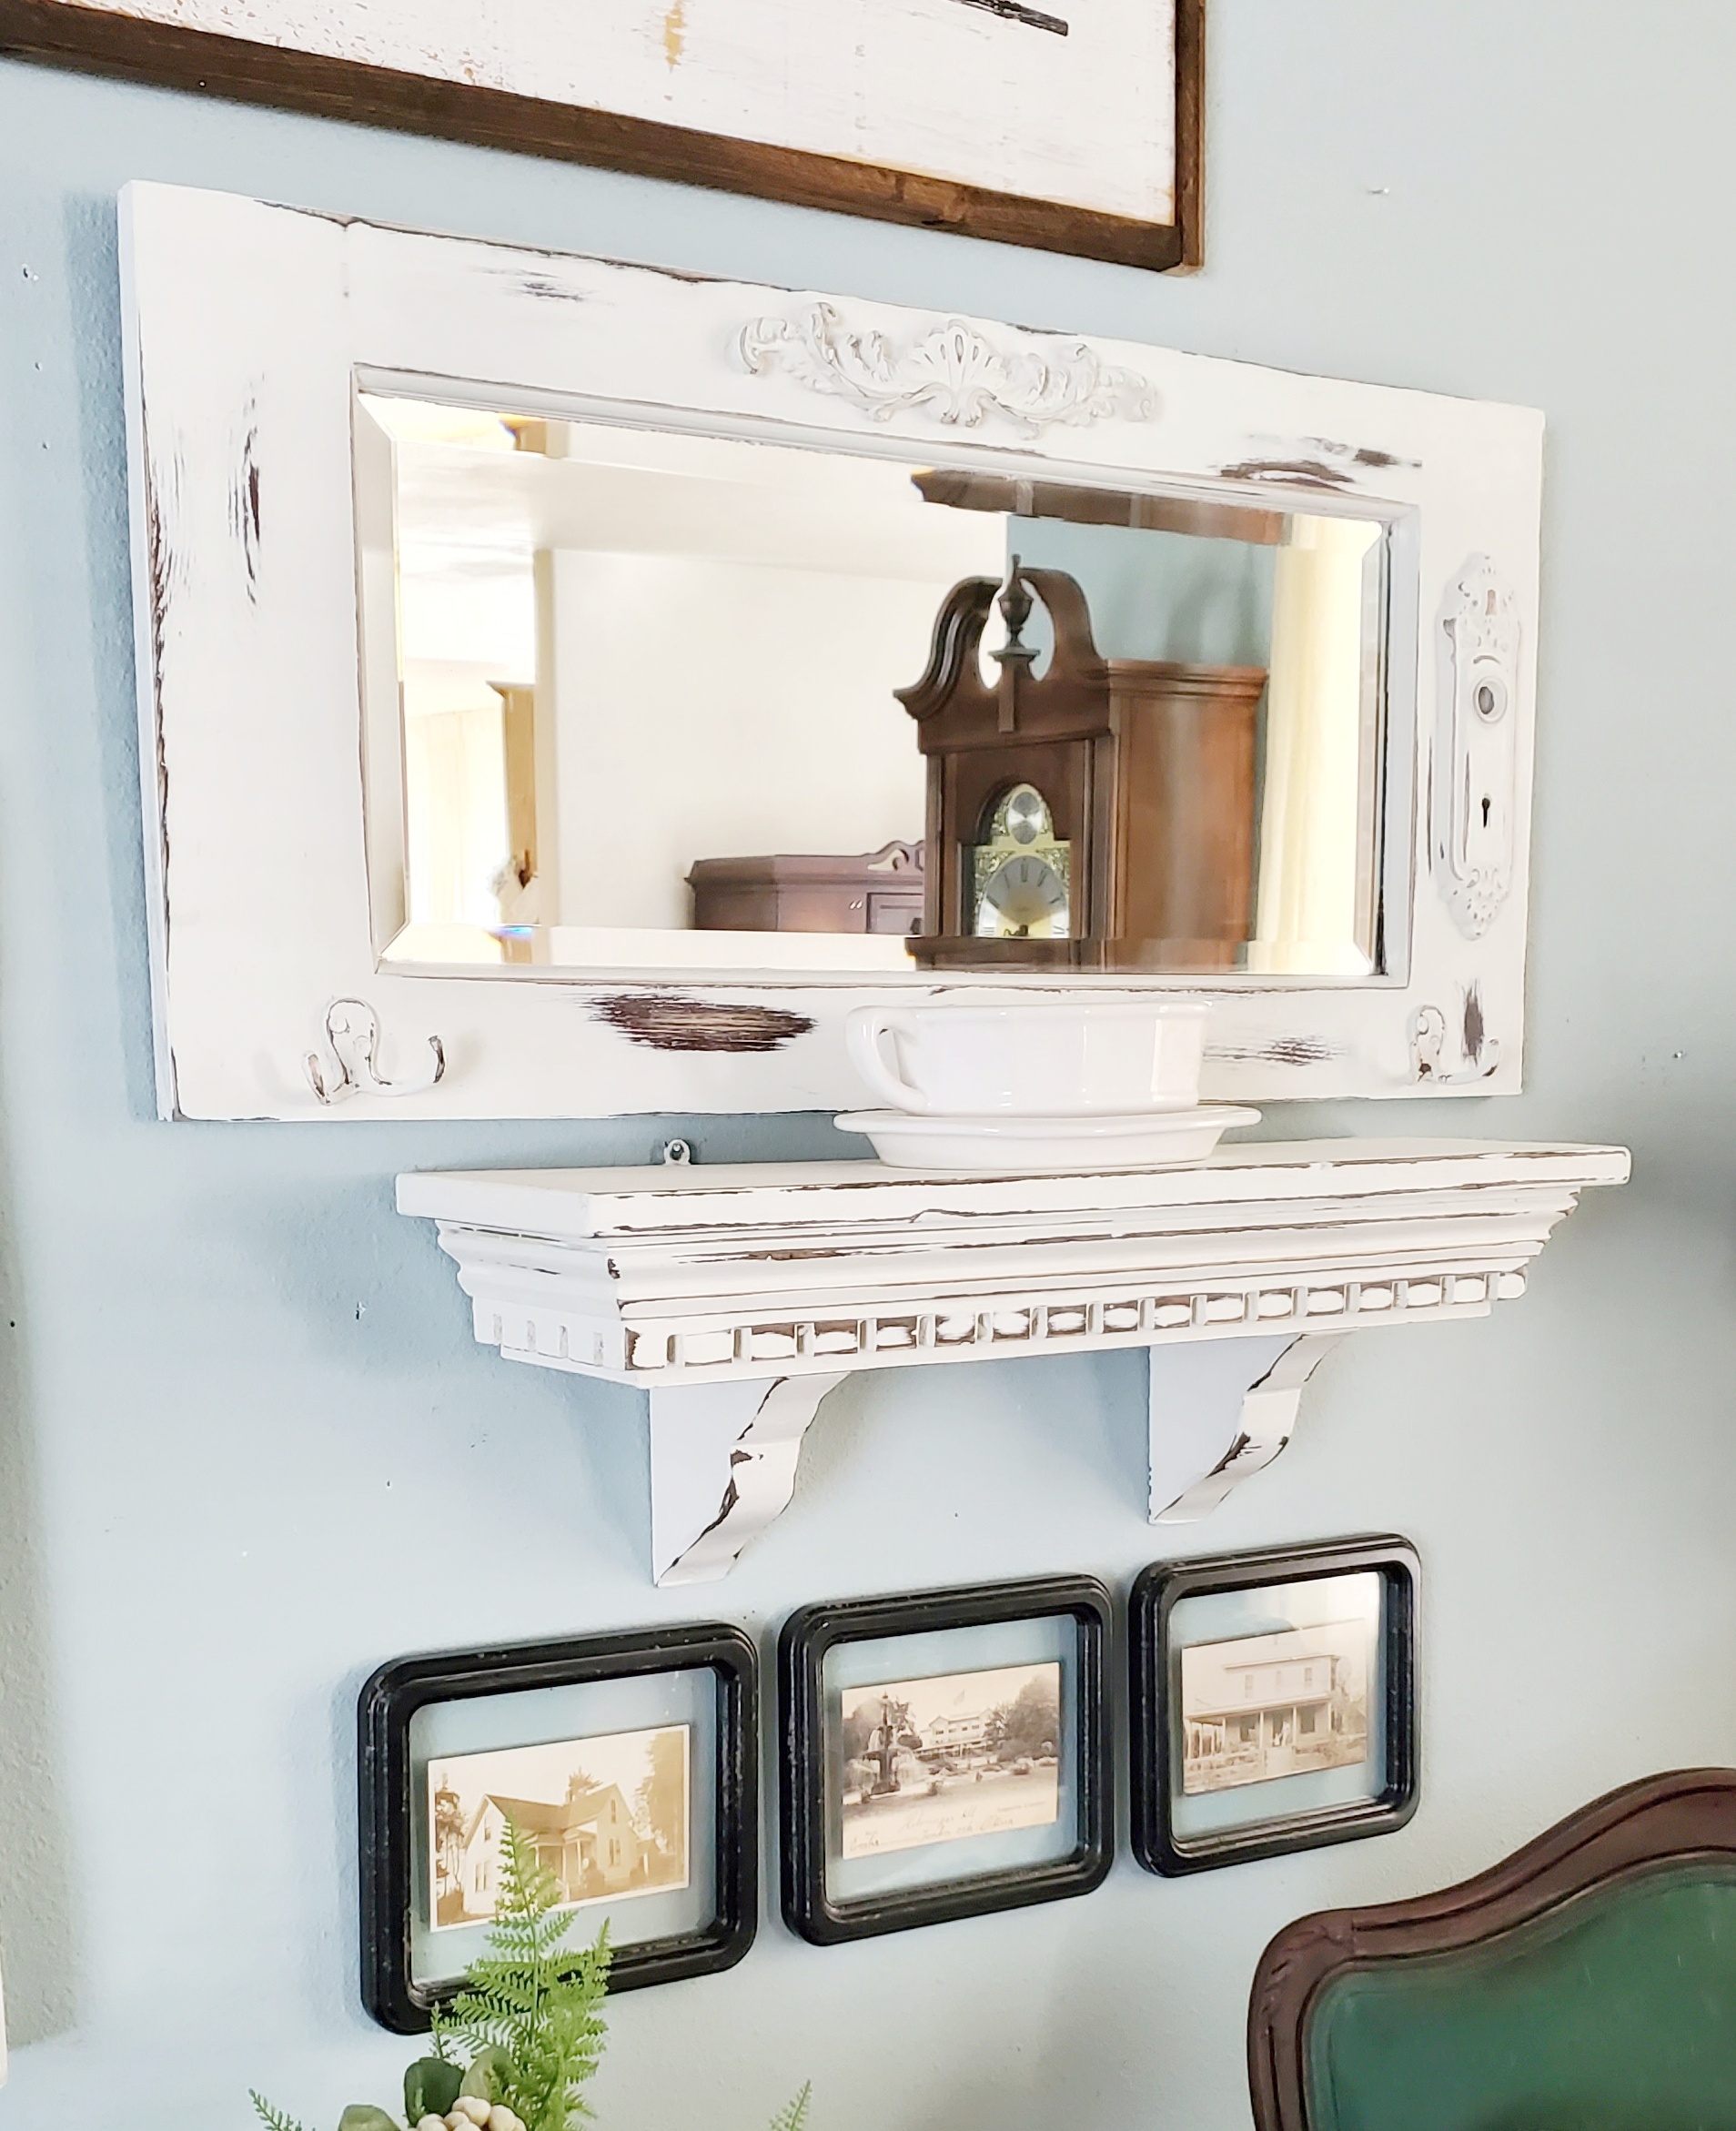 How to Give a Goodwill Shelf & Mirror a Vintage Vibe